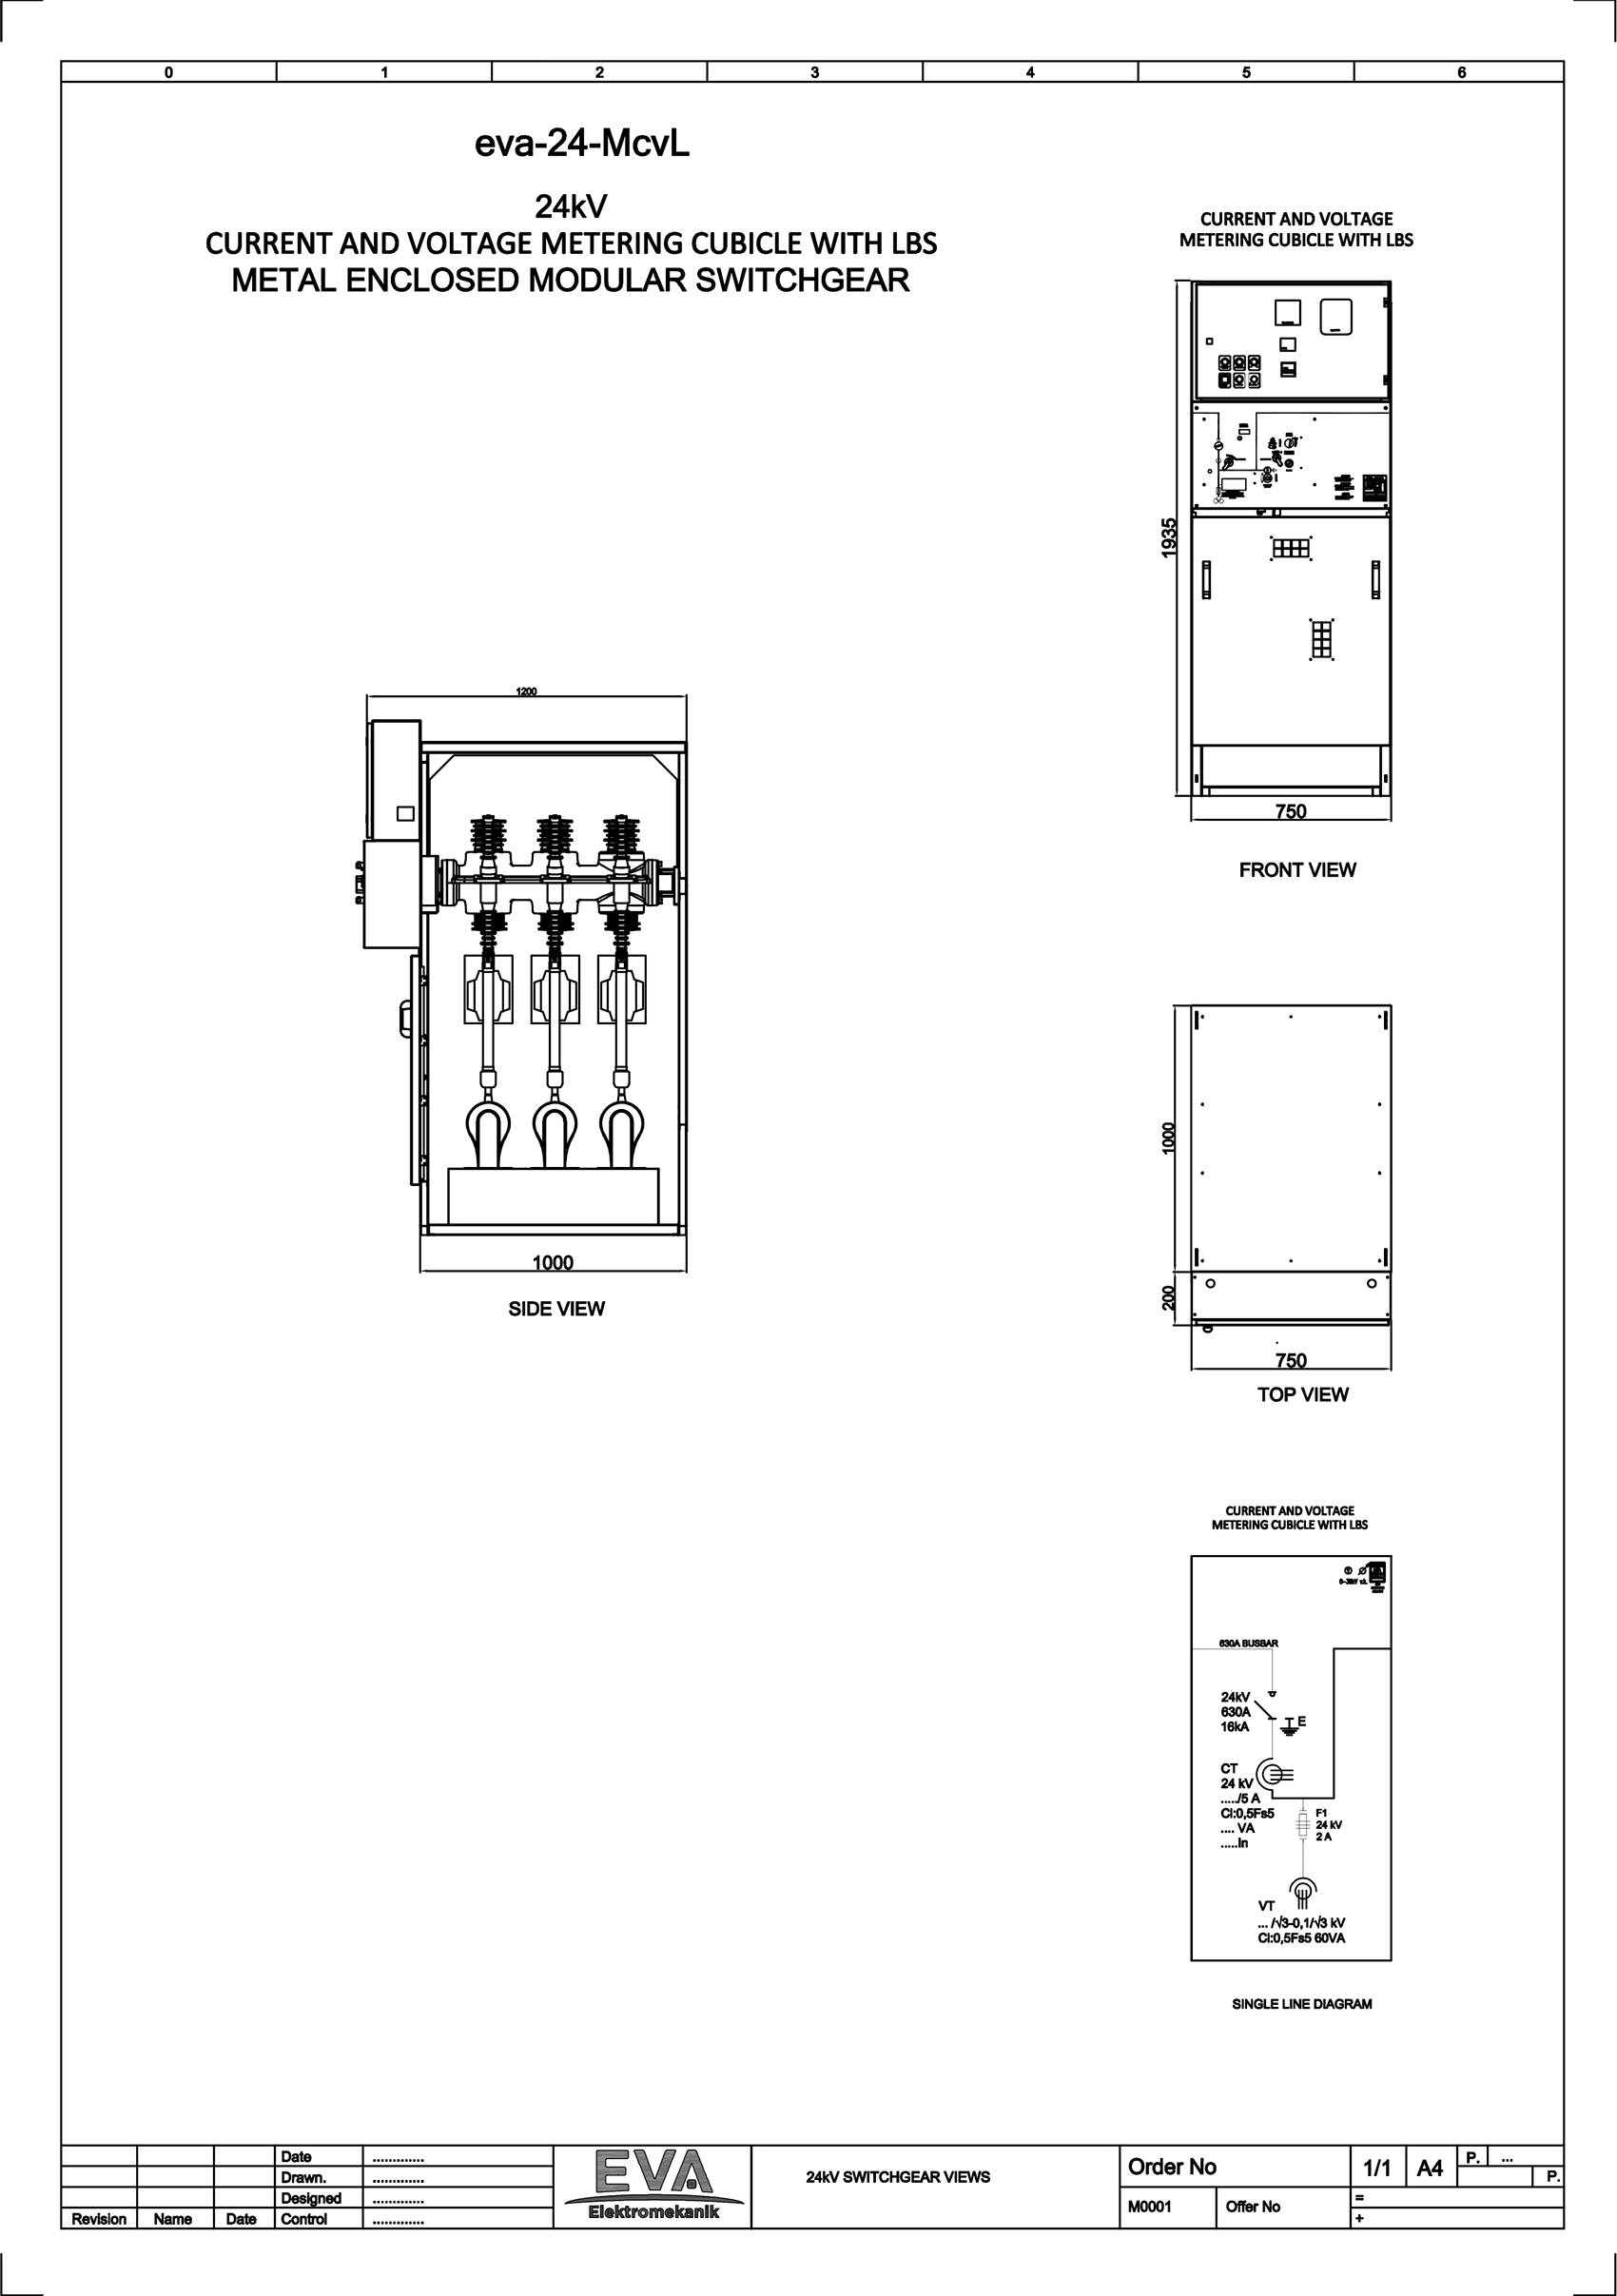 Current and Voltage Metering Cubicle with Load Break Switch (LBS)